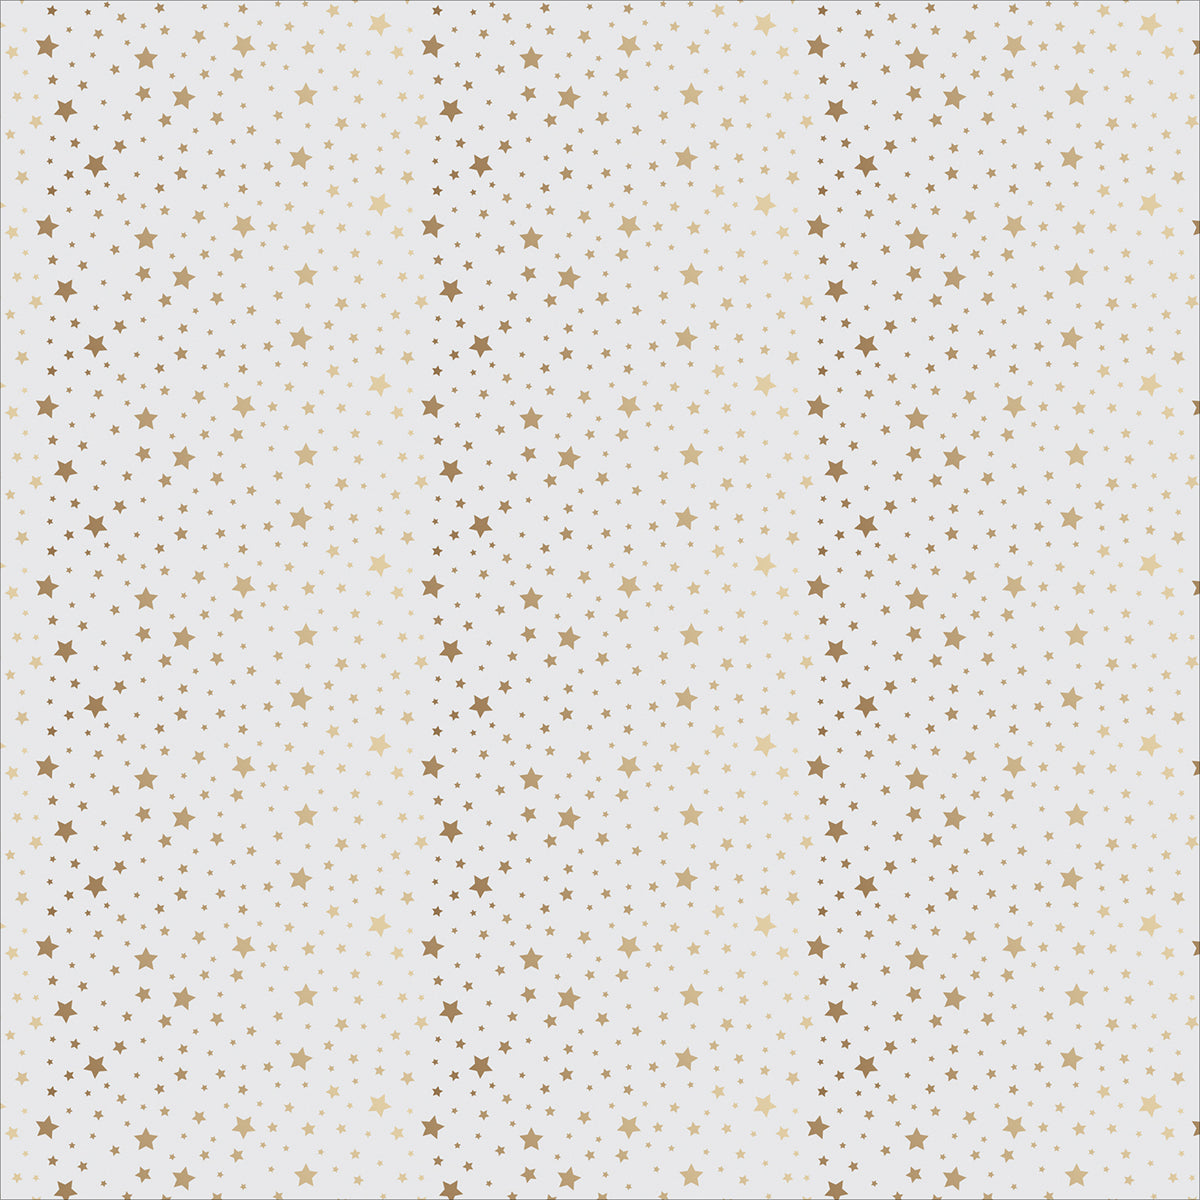 American Crafts Pow Glitter Paper 12x12 Solid/Gold